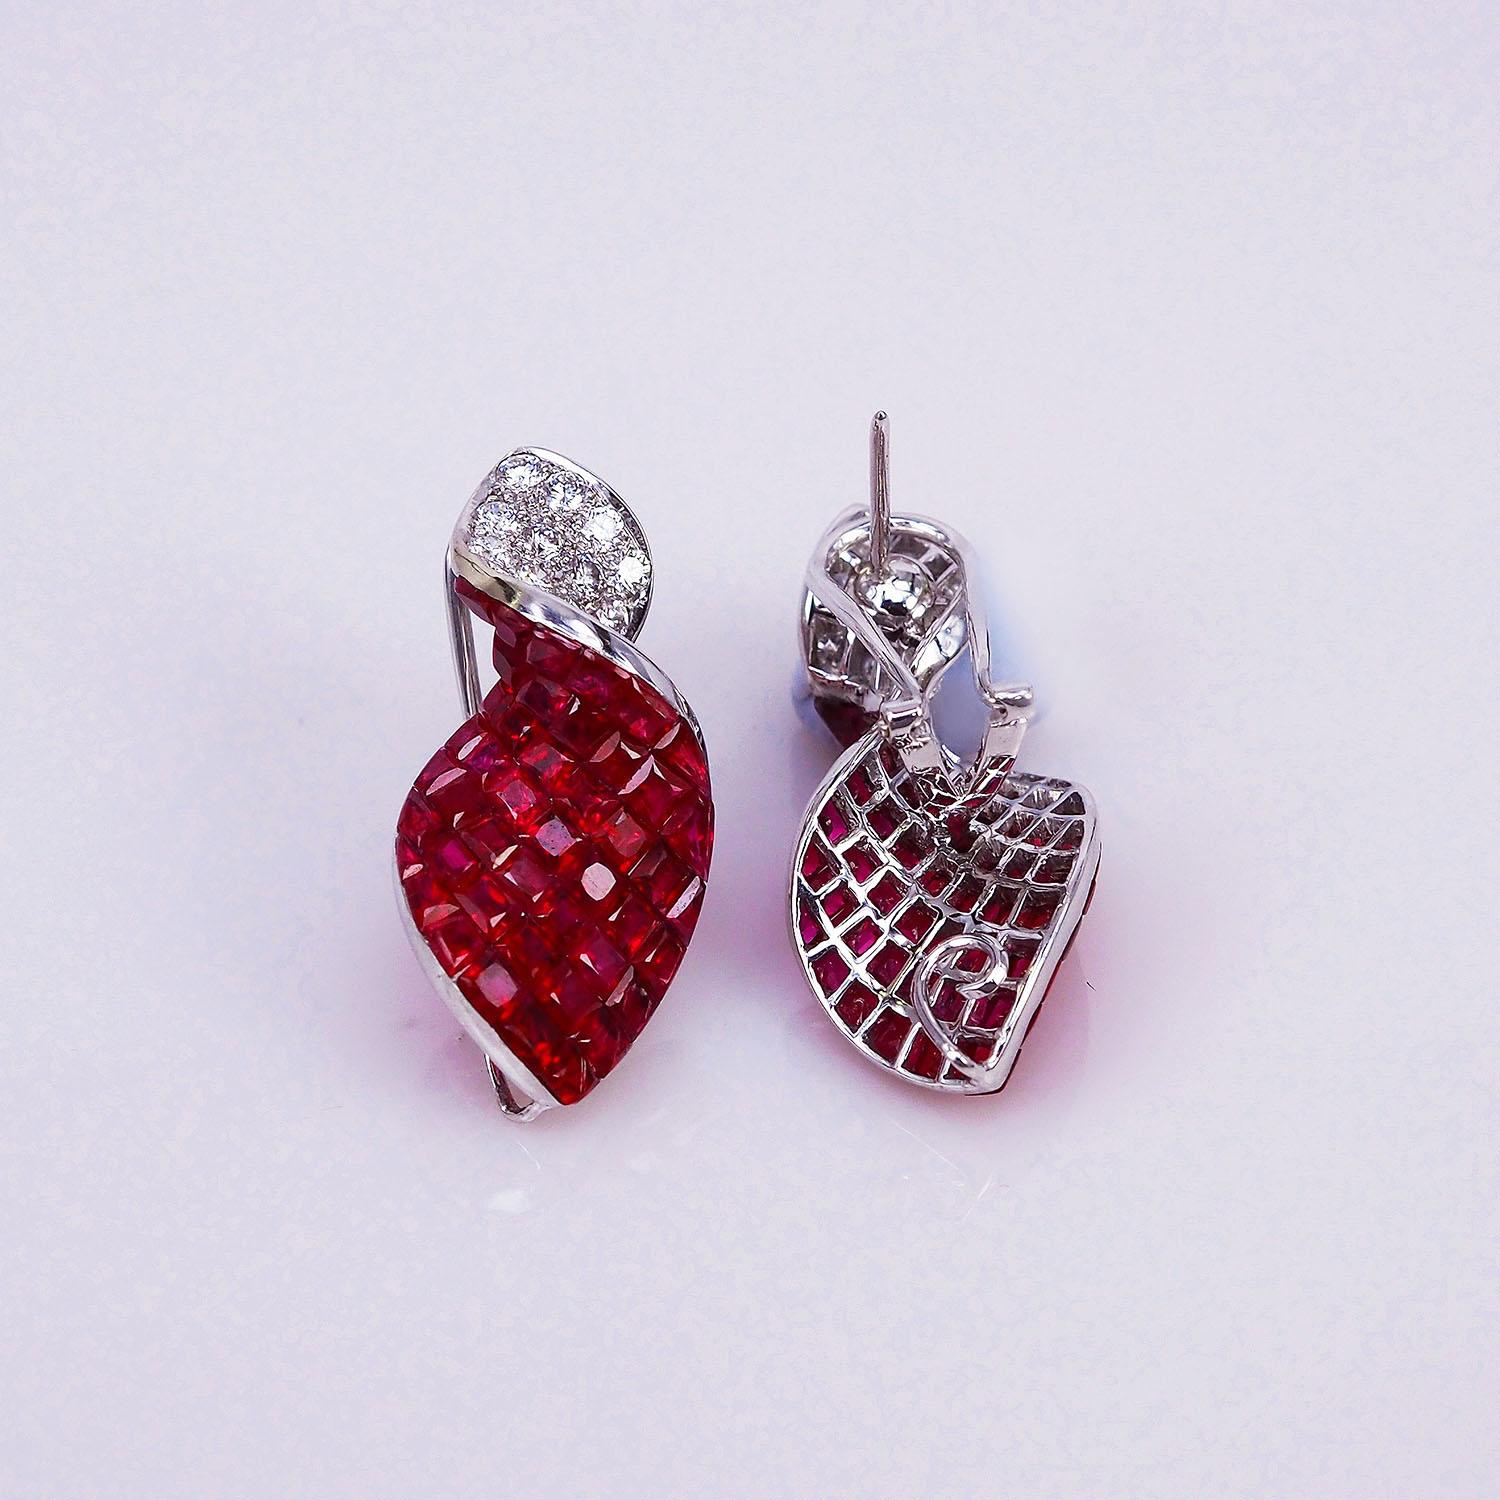 We use the top quality Ruby which make in invisible setting.We set the stone in perfection as we are professional in this kind of setting more than 40 years.The invisible is a highly technique .We cut and groove every stone .Therefore; we can